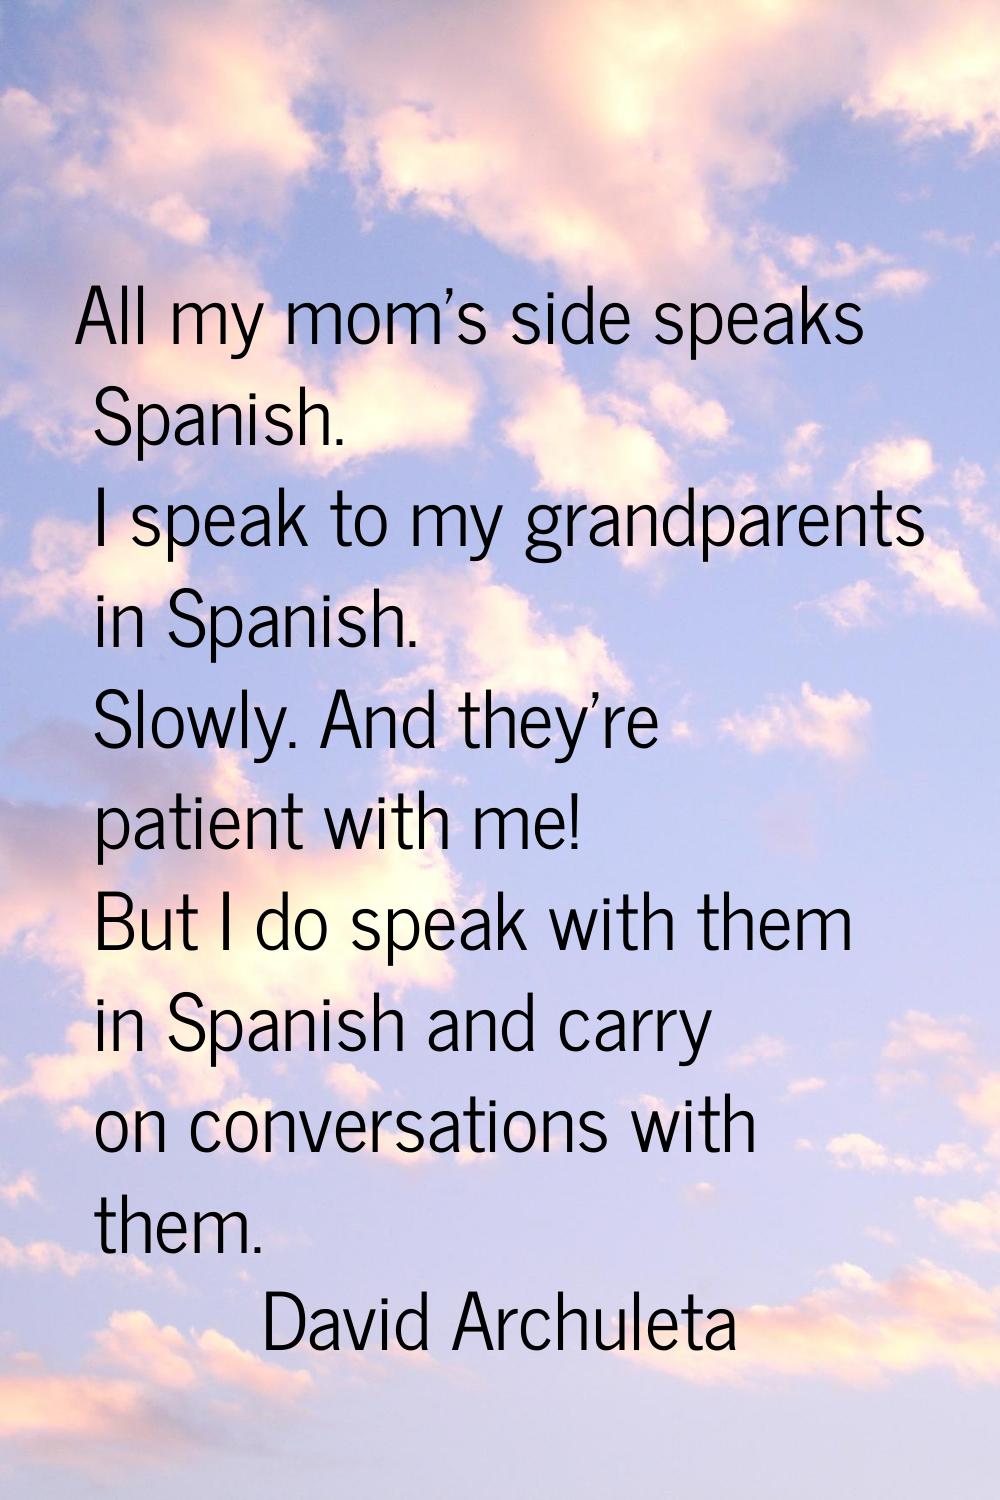 All my mom's side speaks Spanish. I speak to my grandparents in Spanish. Slowly. And they're patien